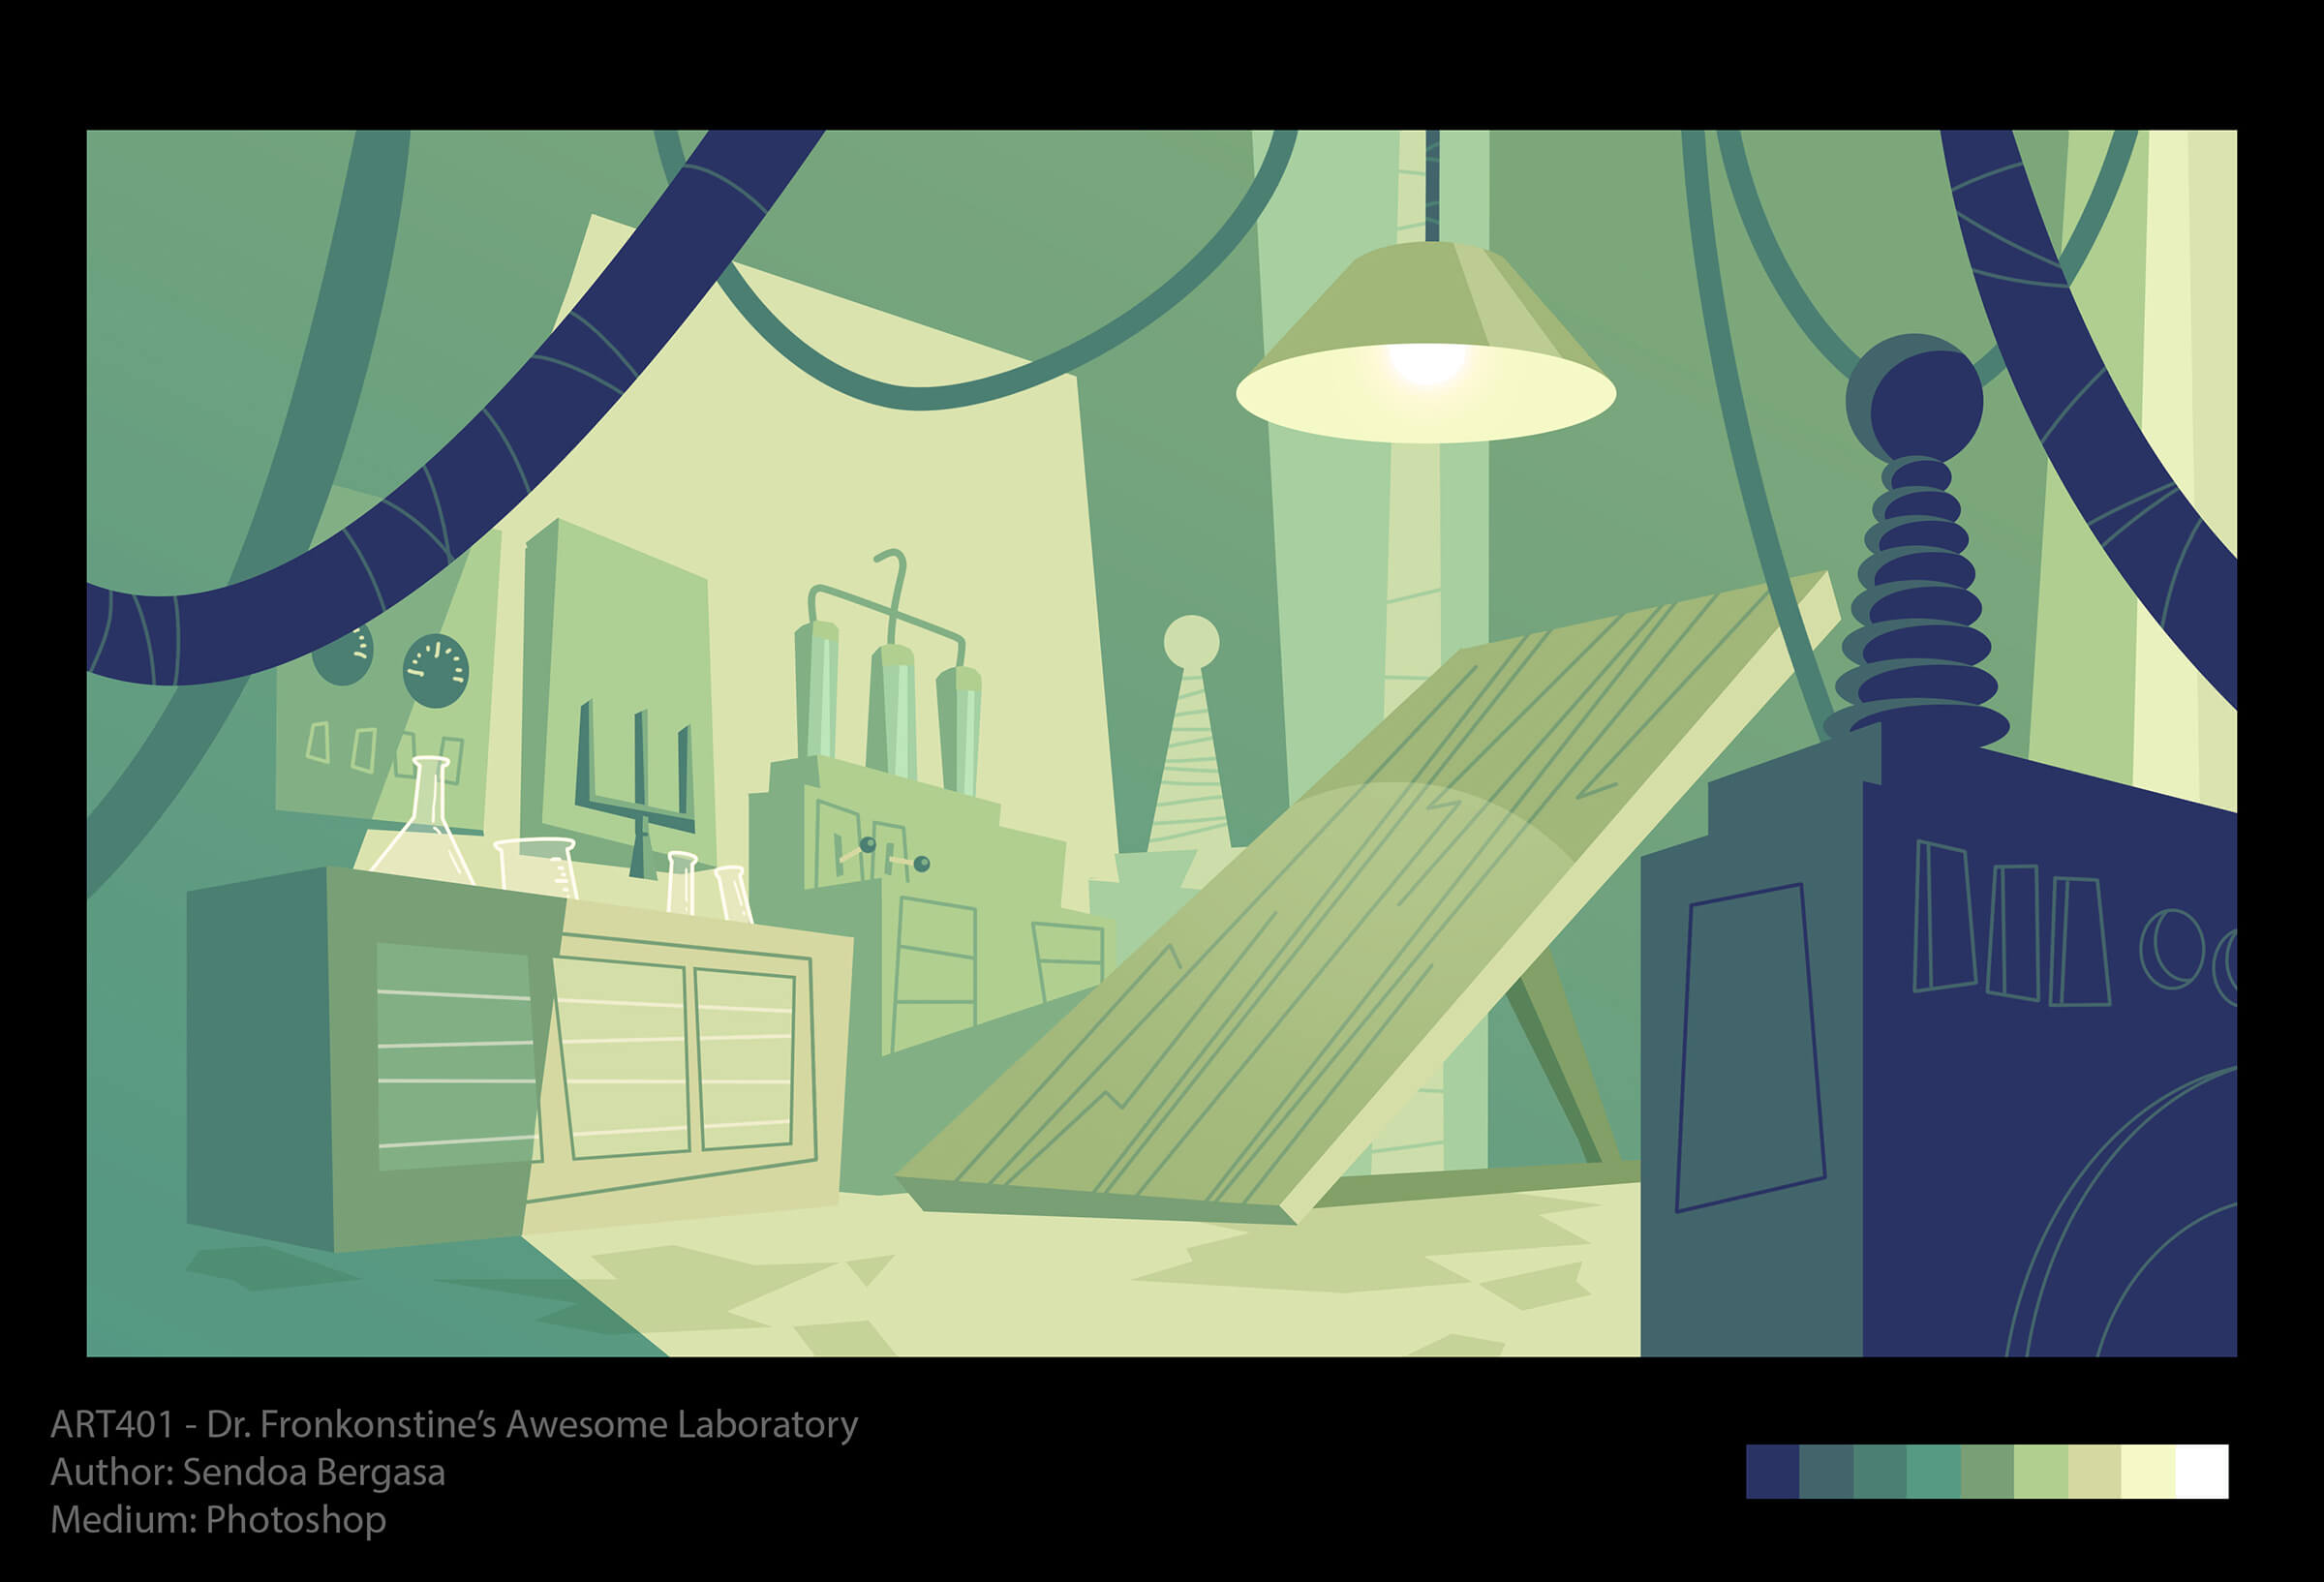 Stylized depiction of a mad scientist&#039;s laboratory in shades of green and blue, with switches, beakers, and operating table.